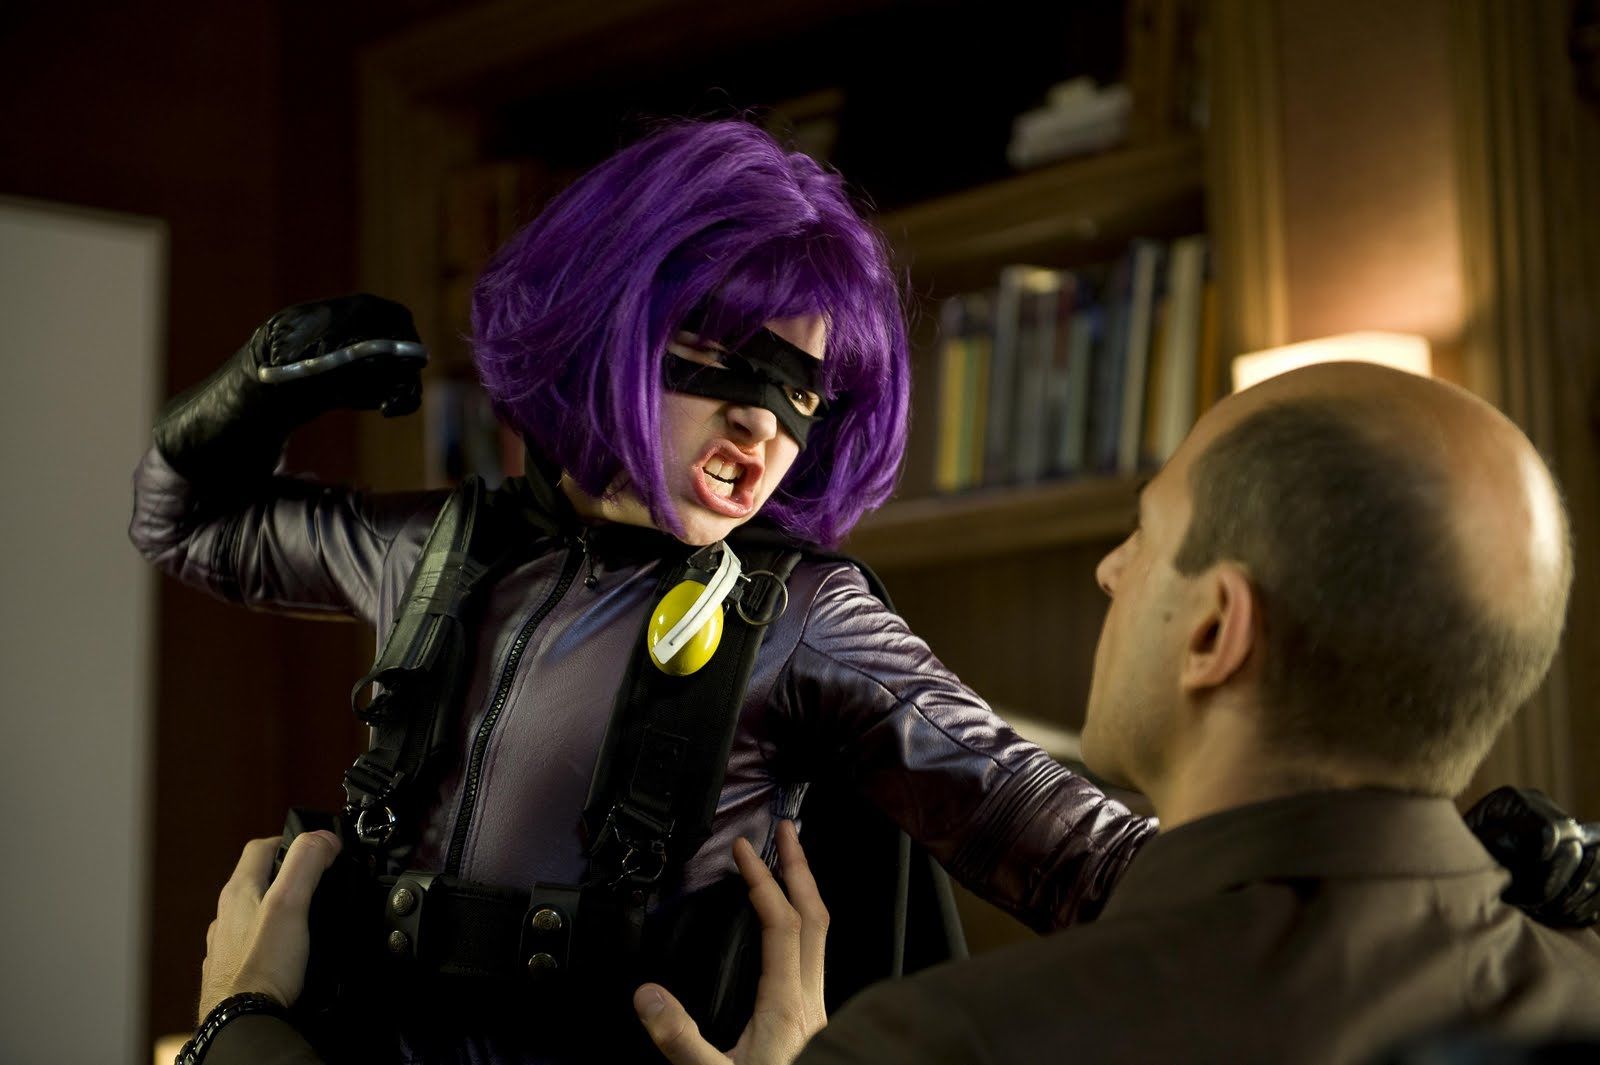 hit-girl-punching-kick-ass-3-and-a-hit-girl-prequel-on-the-way-jpeg-261597.jpg